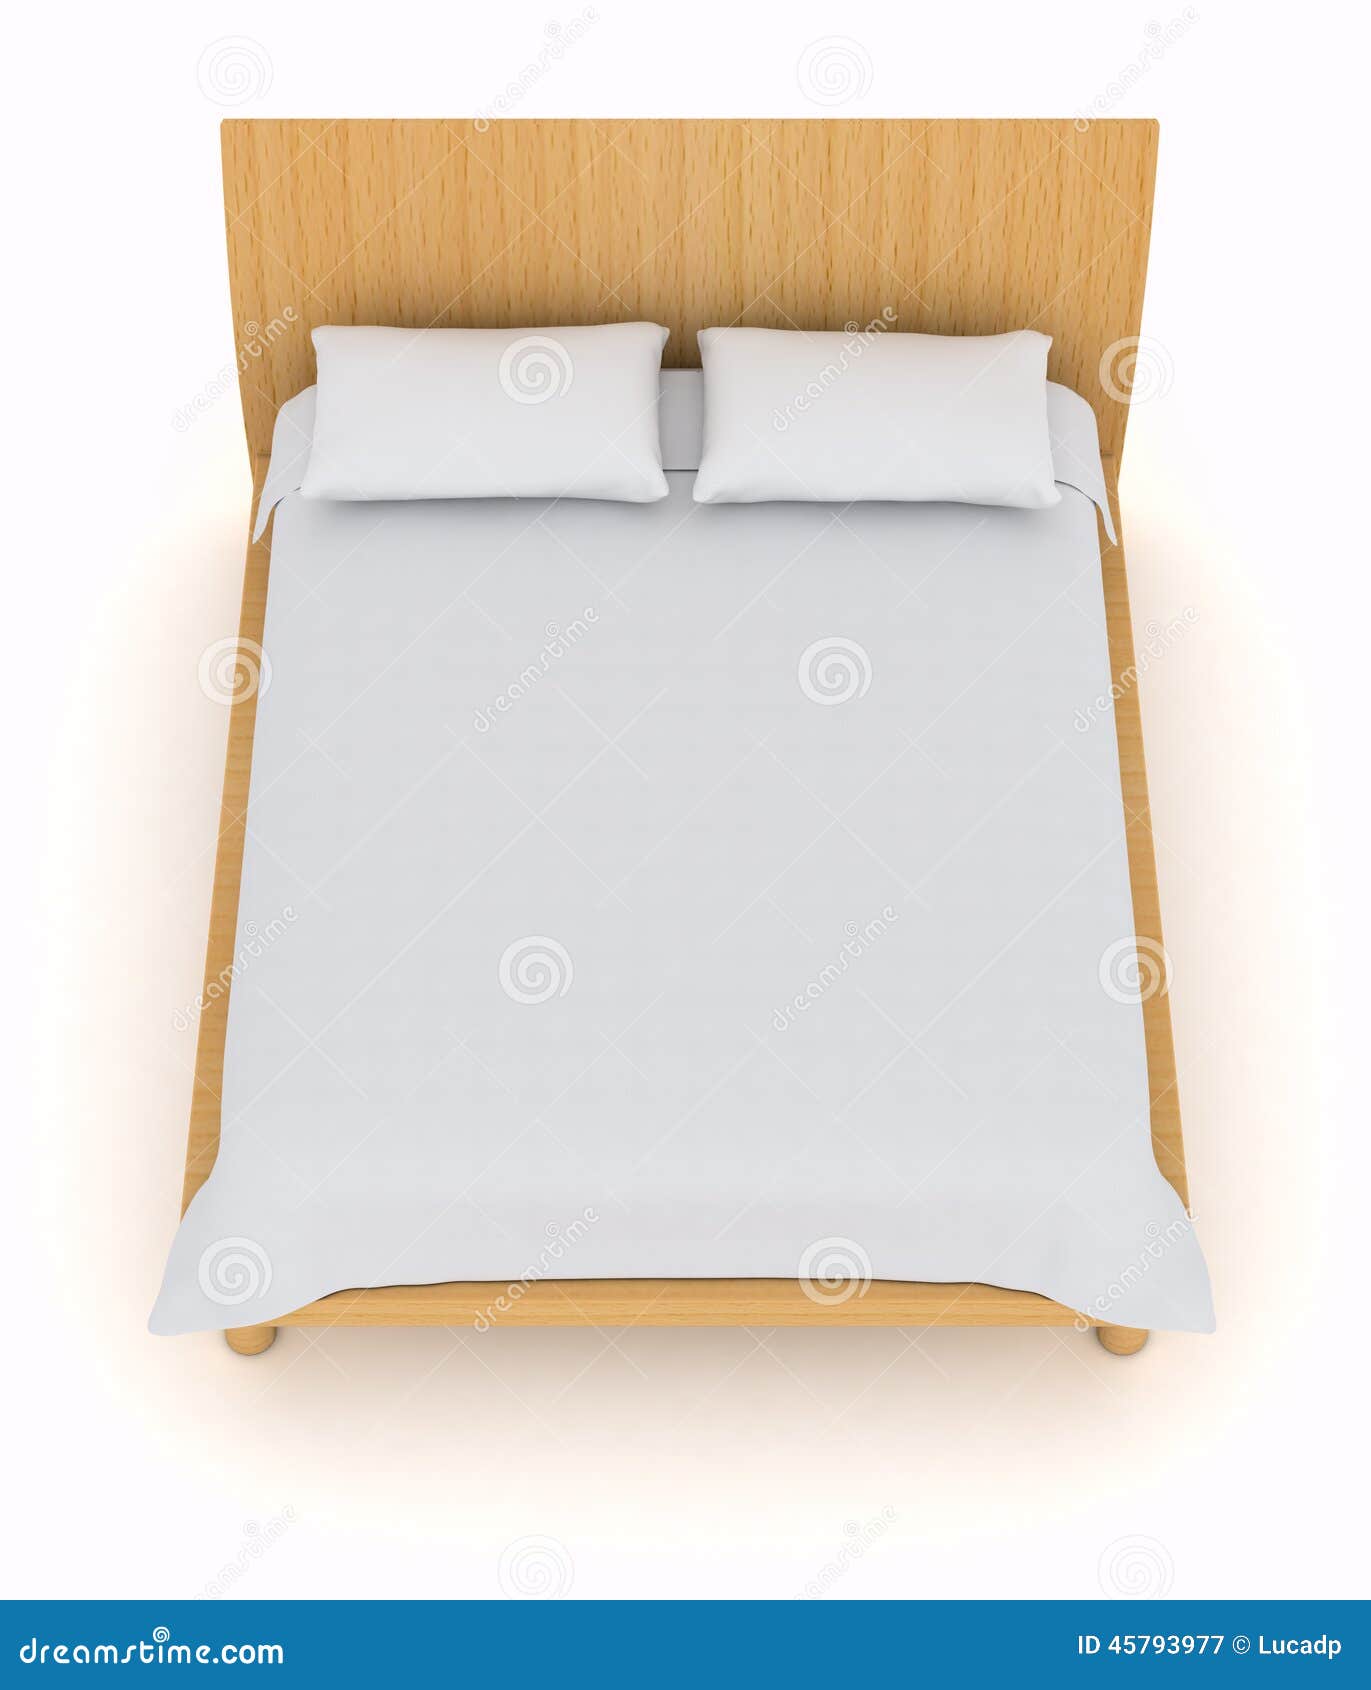 Top view of a double bed with white pillows and blanket (3d render).